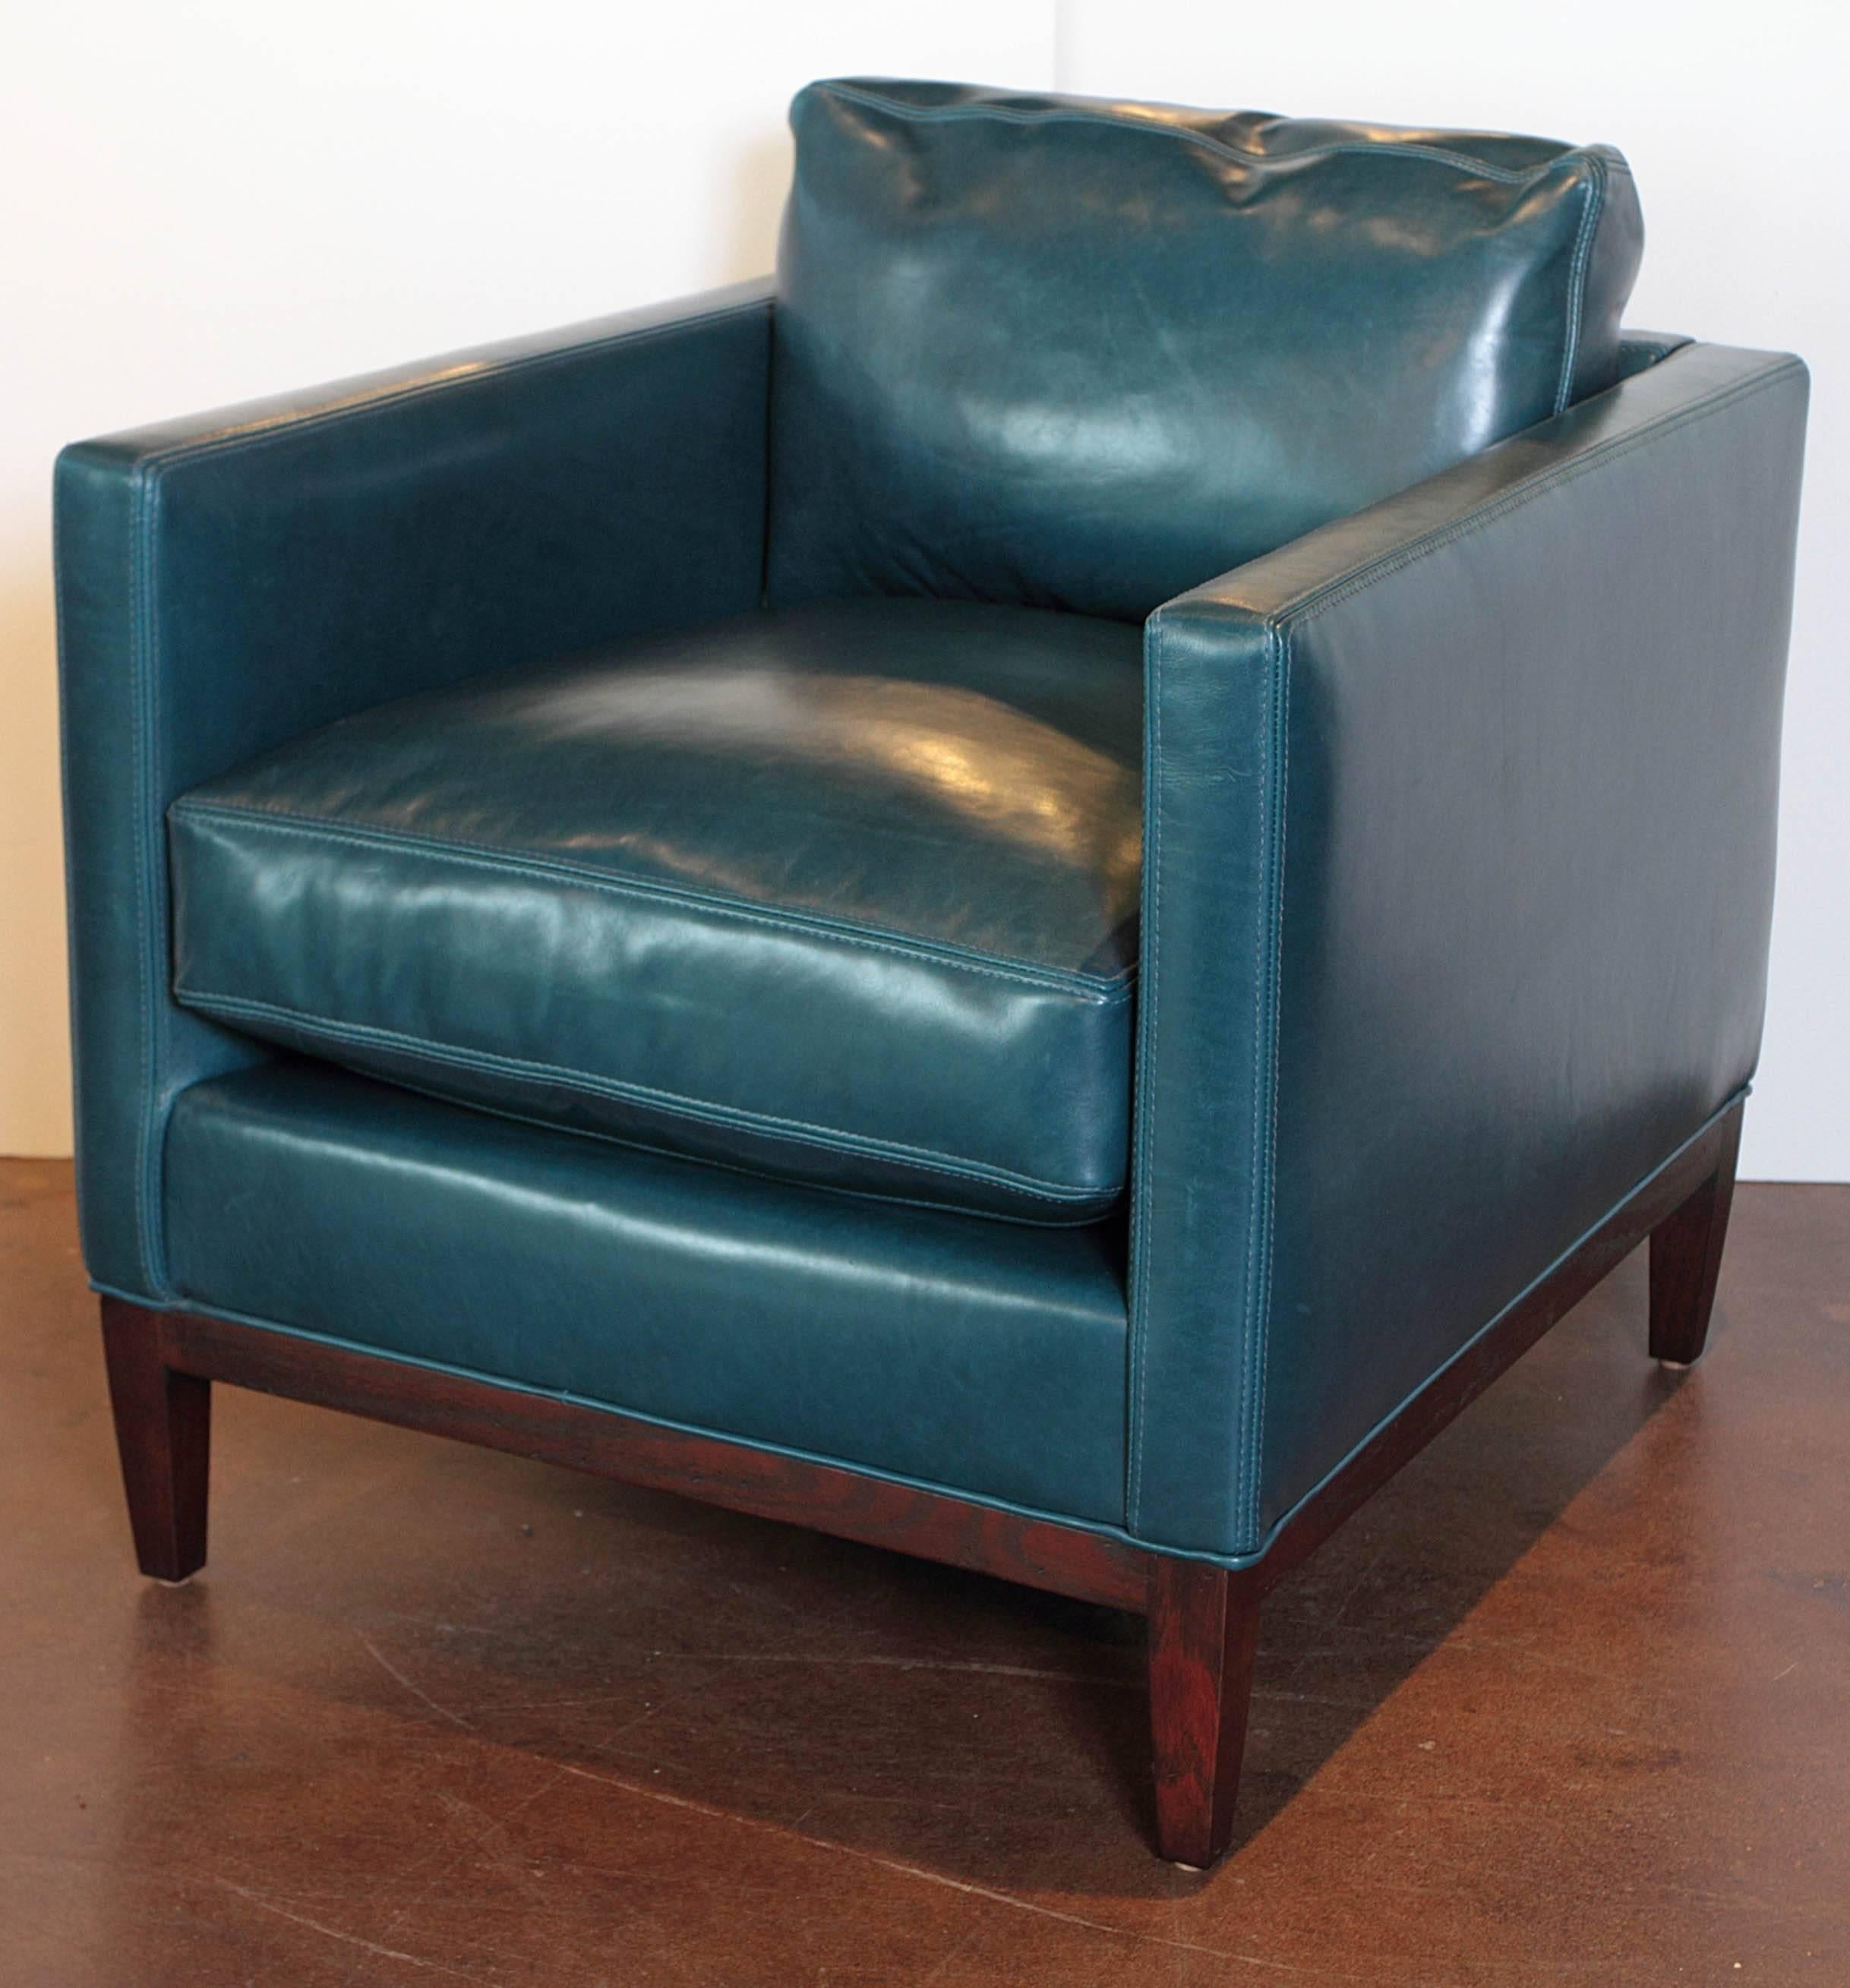 Parisian blue leather lounge chair.
Brand: LEE.

Parisan blue leather with vintage chestnut frame, on a cloud nine cushion filled package.

Measurements: Arm height 26